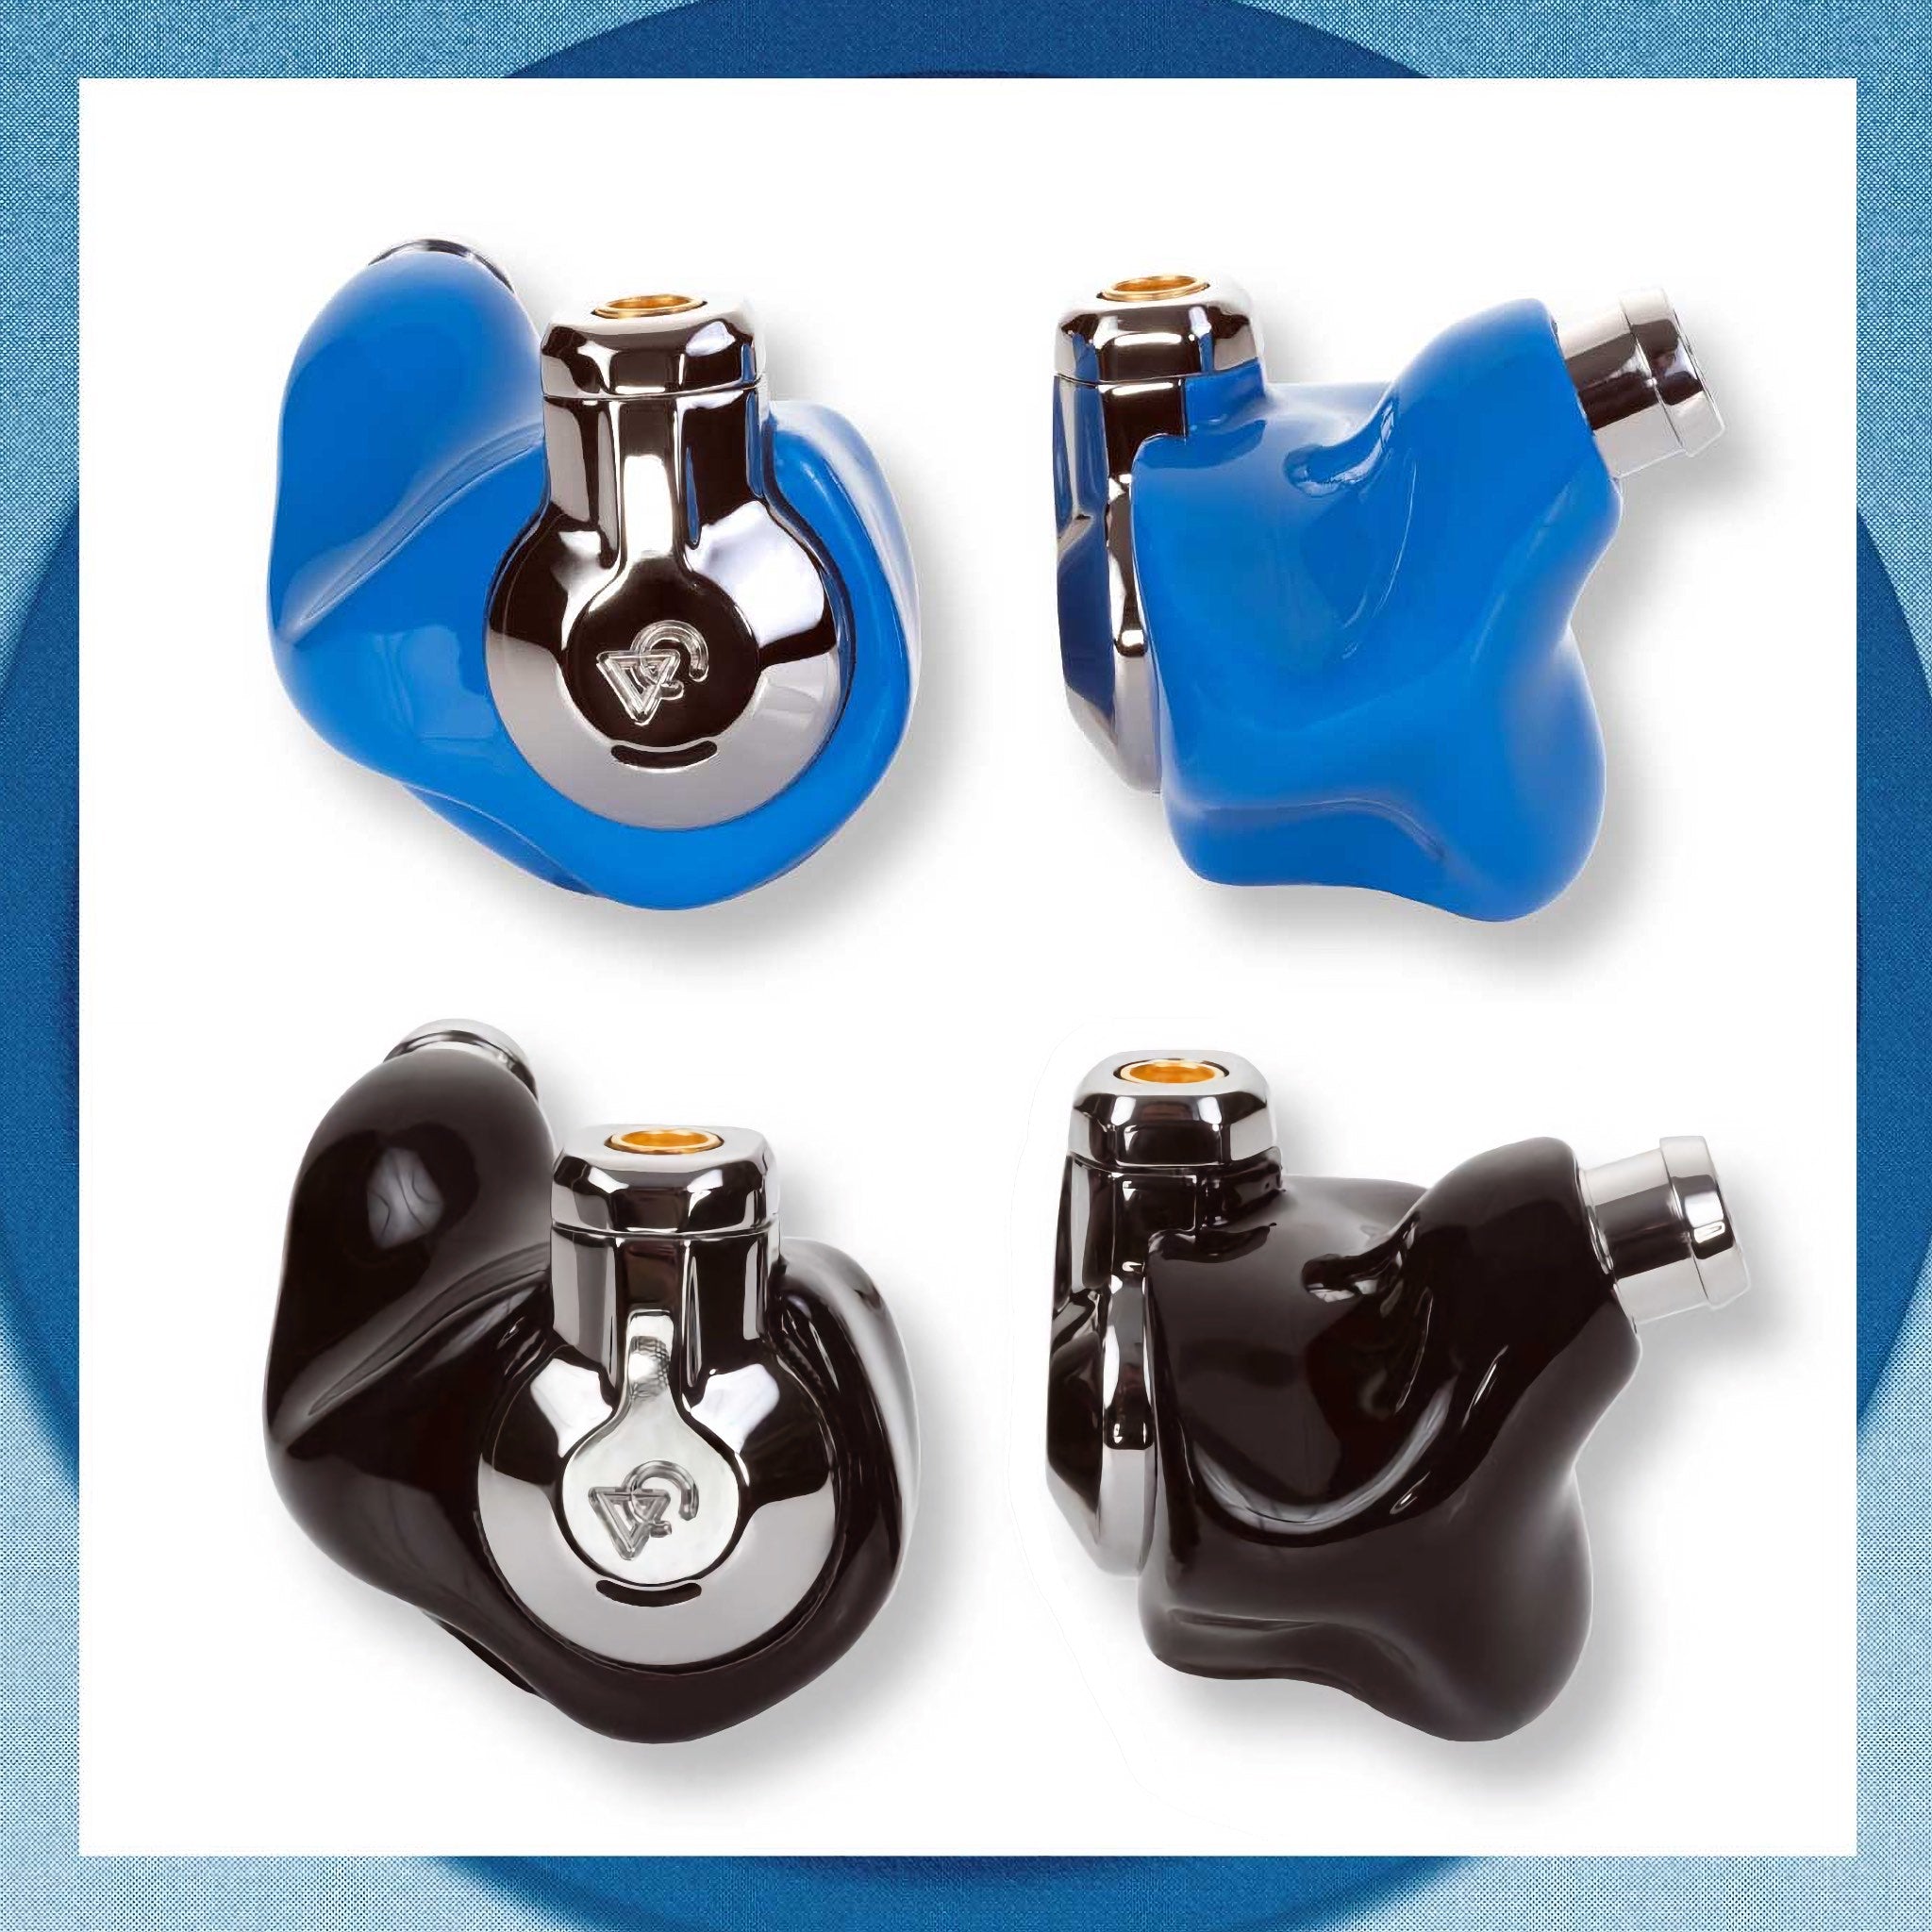 Campfire Audio Cascara black and blue earphones with blue frame